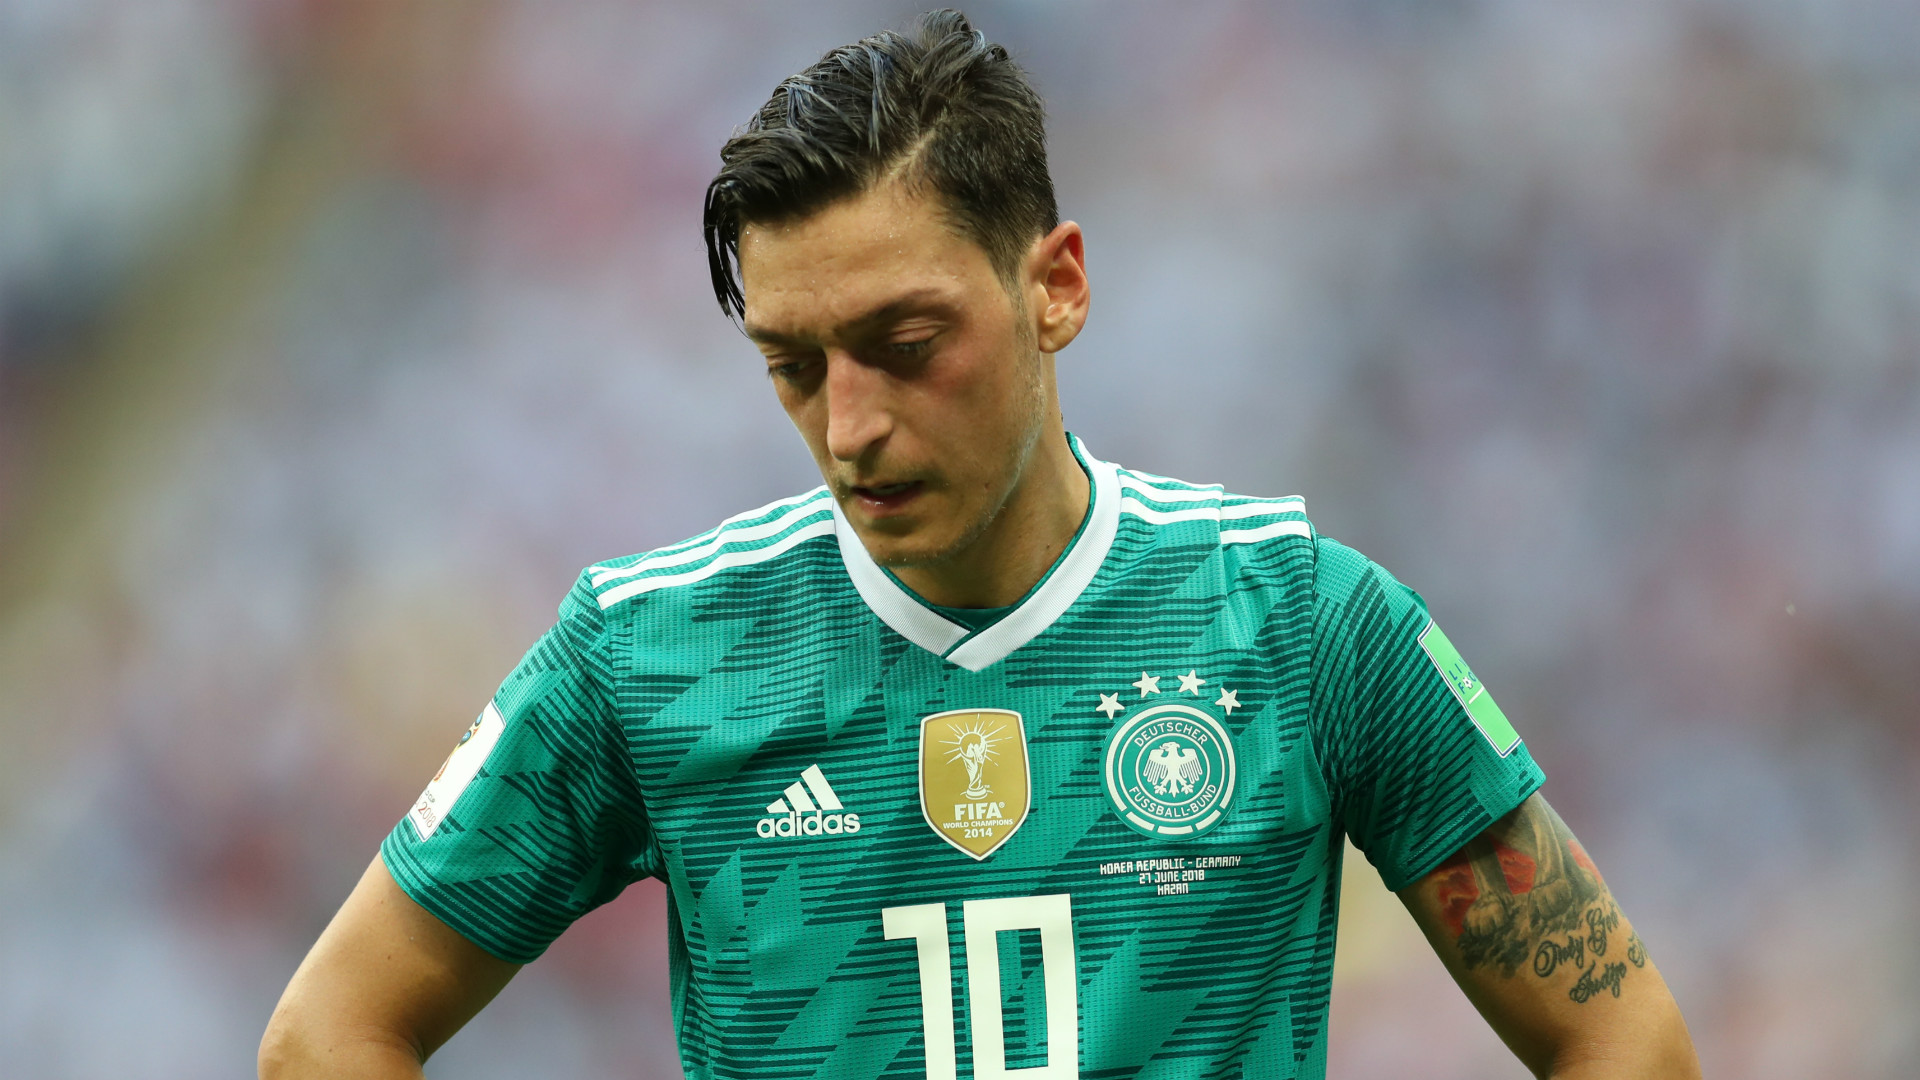 'Ozil always wanted to have fun and play football' - Neuer defends former Germany teammate